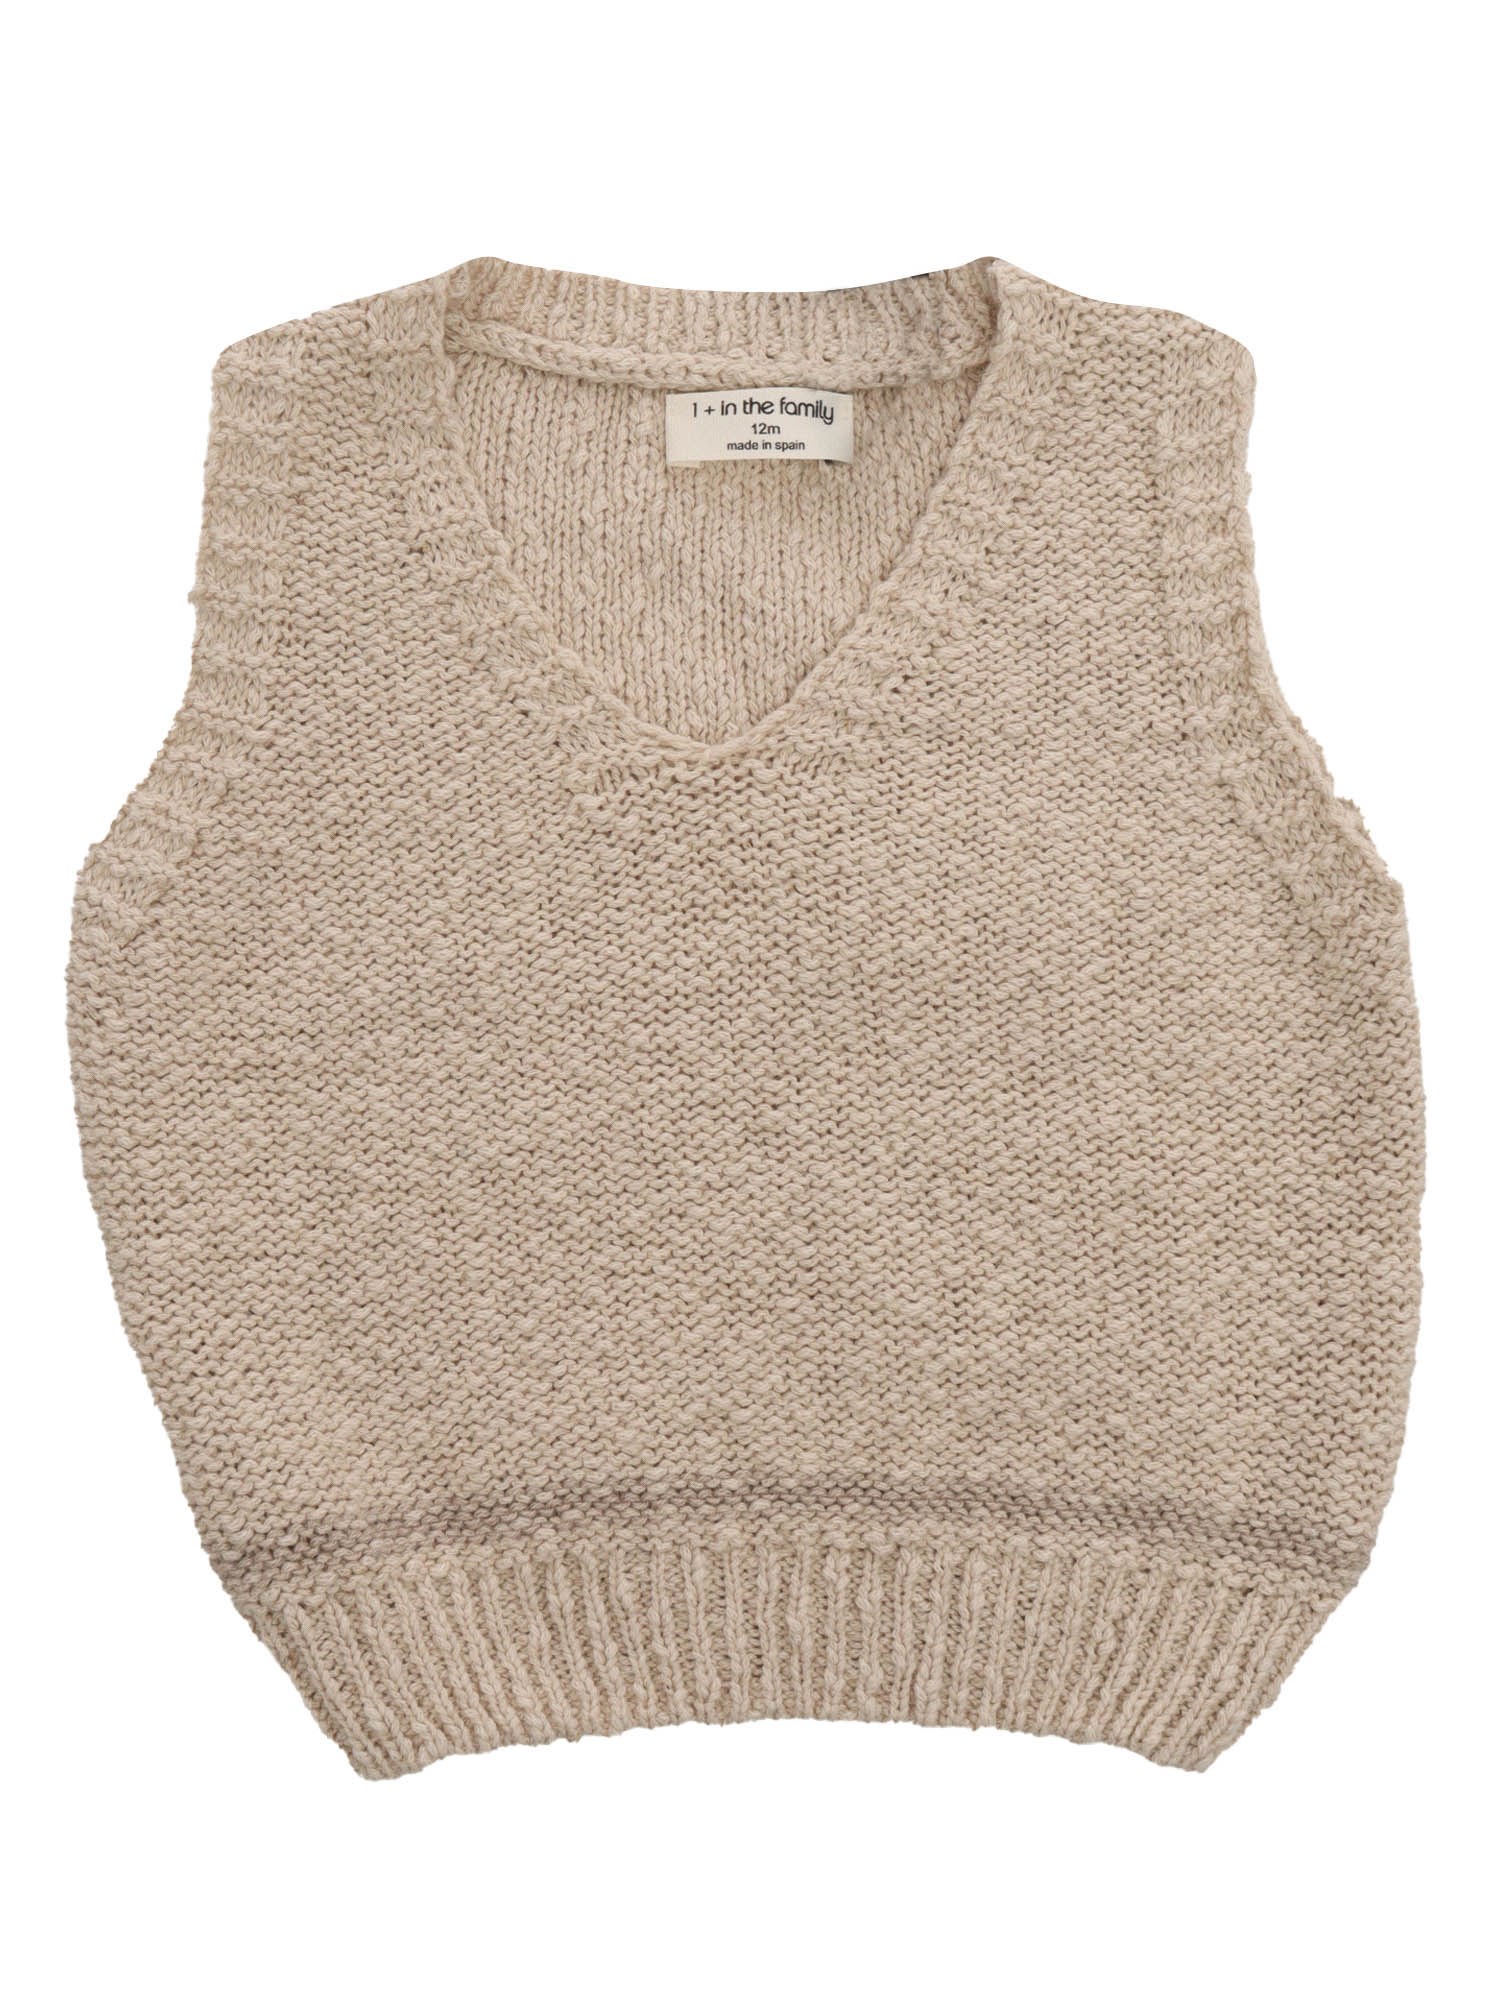 One More In The Family Kids' Brown Knitted Waistcoat